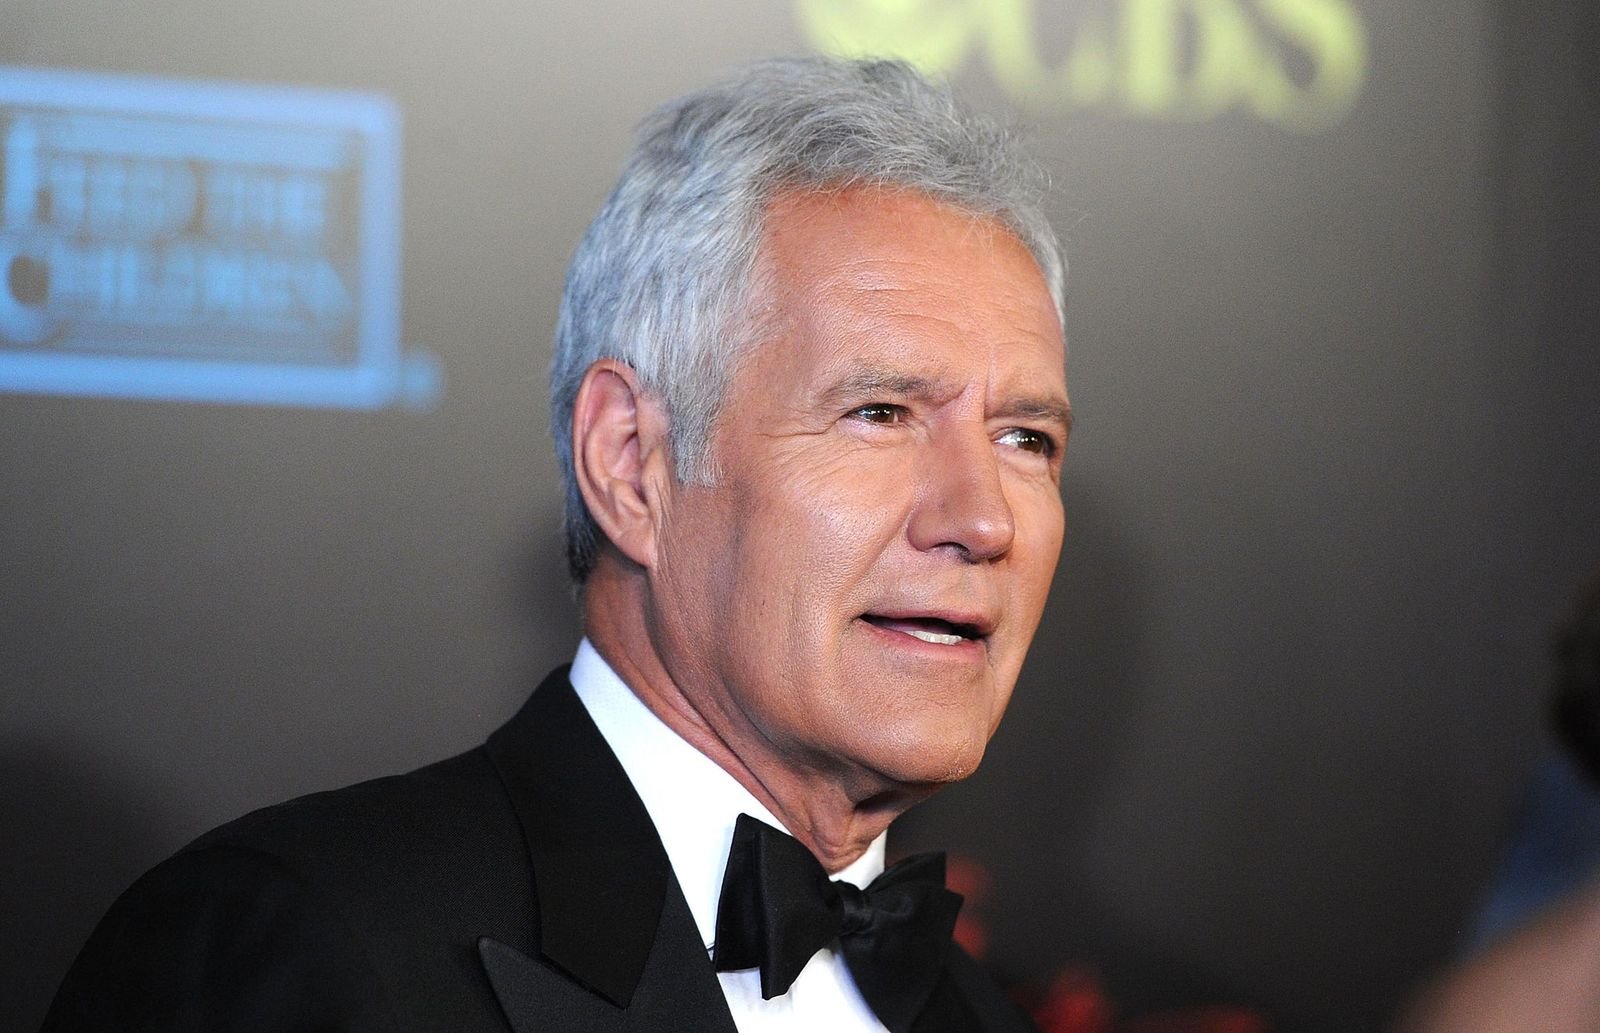 Alex Trebek at the 37th Annual Daytime Entertainment Emmy Awards held at the Las Vegas Hilton on June 27, 2010, in Nevada | Photo: Frazer Harrison/Getty Images